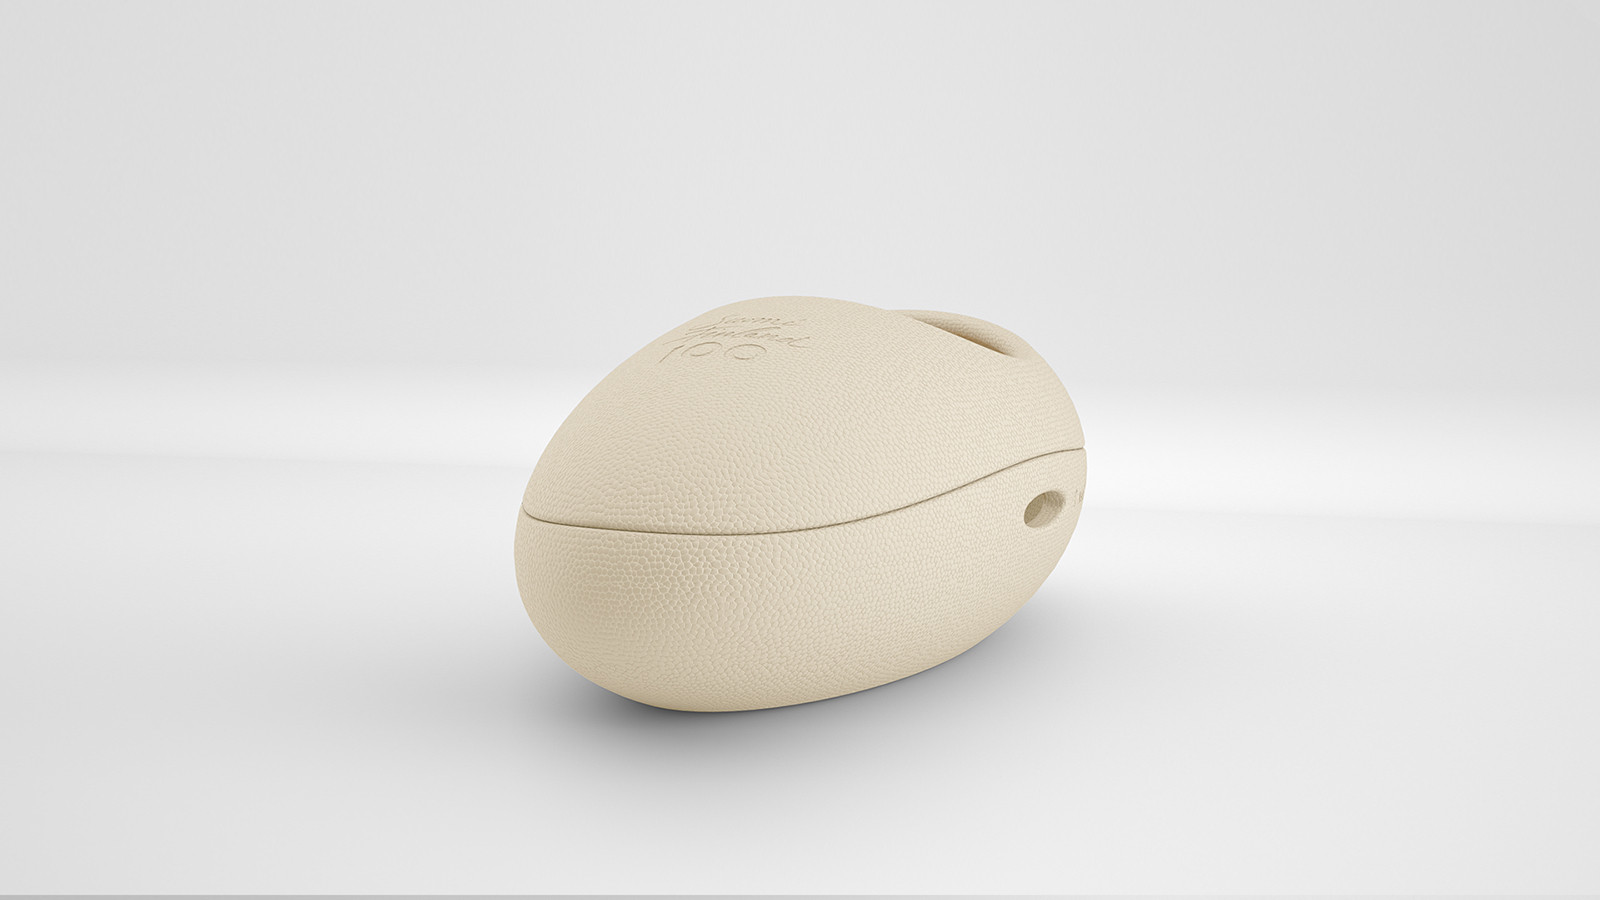 toy | the softness and lightness represent a 100% safe and user friendly interaction